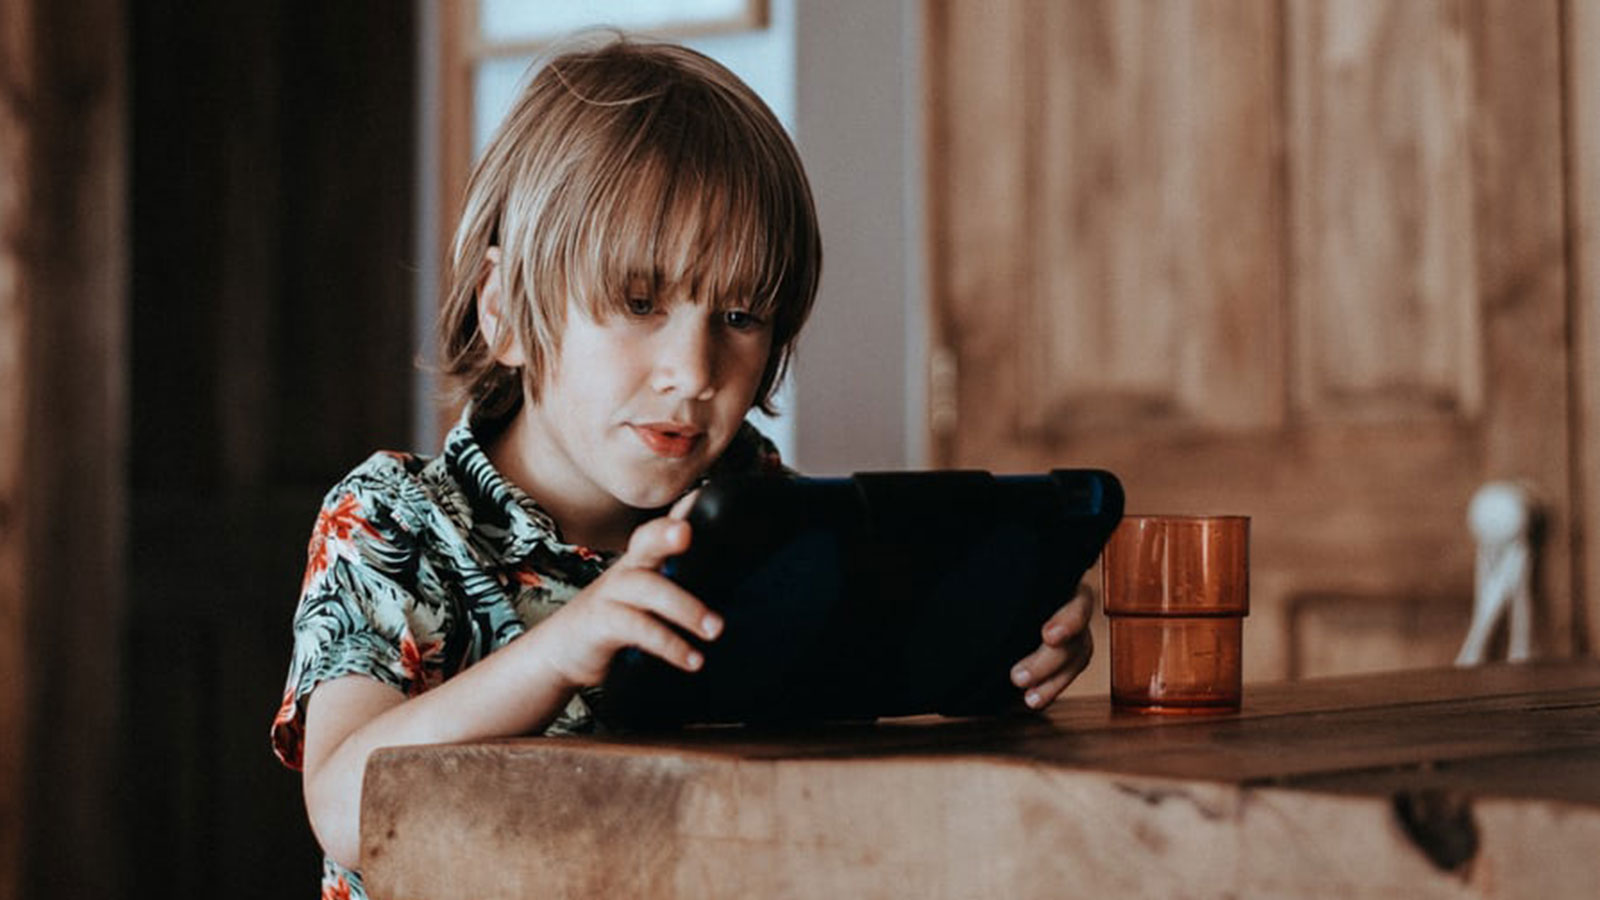 Improvisation with online therapy Thought Piece. A photo of a boy at a table looking at an iPad